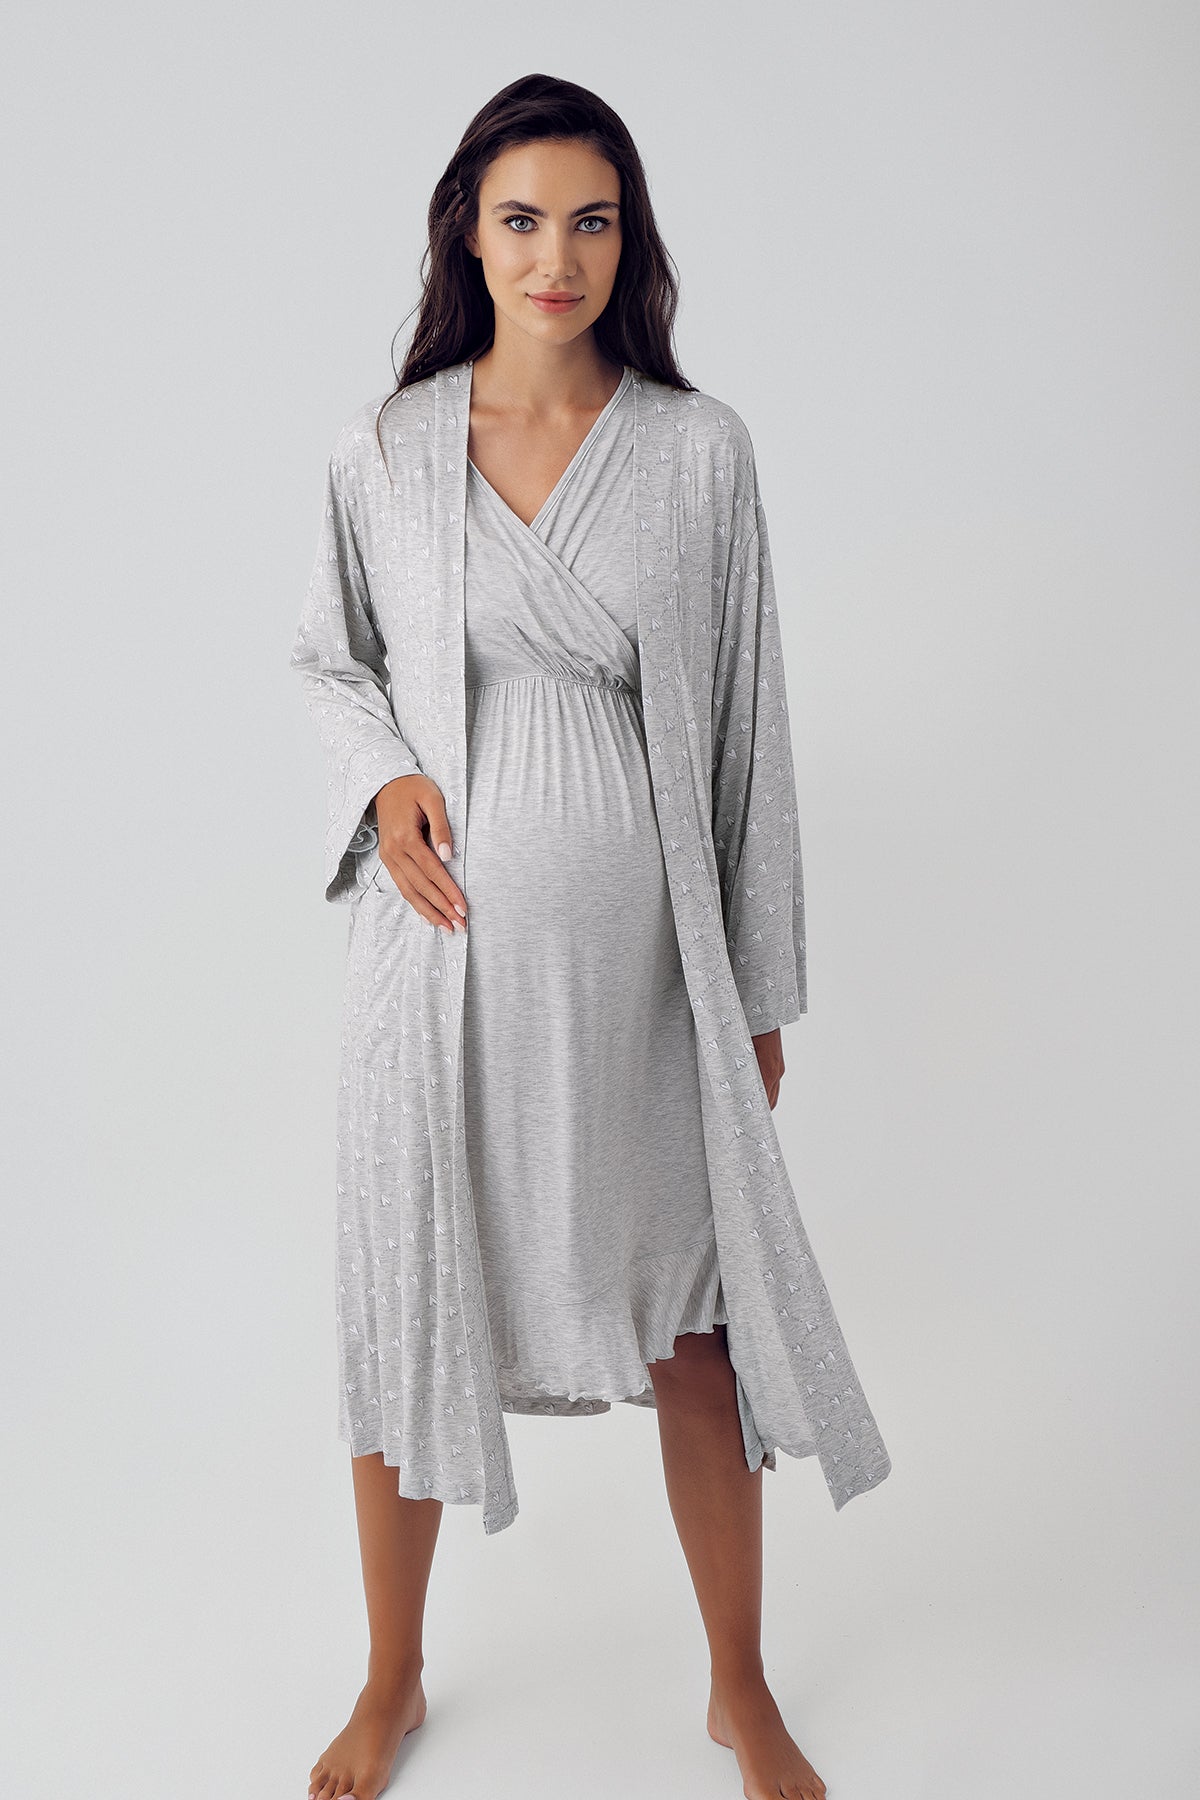 Shopymommy 15402 Double Breasted Maternity & Nursing Nightgown With Polka Dot Robe Grey